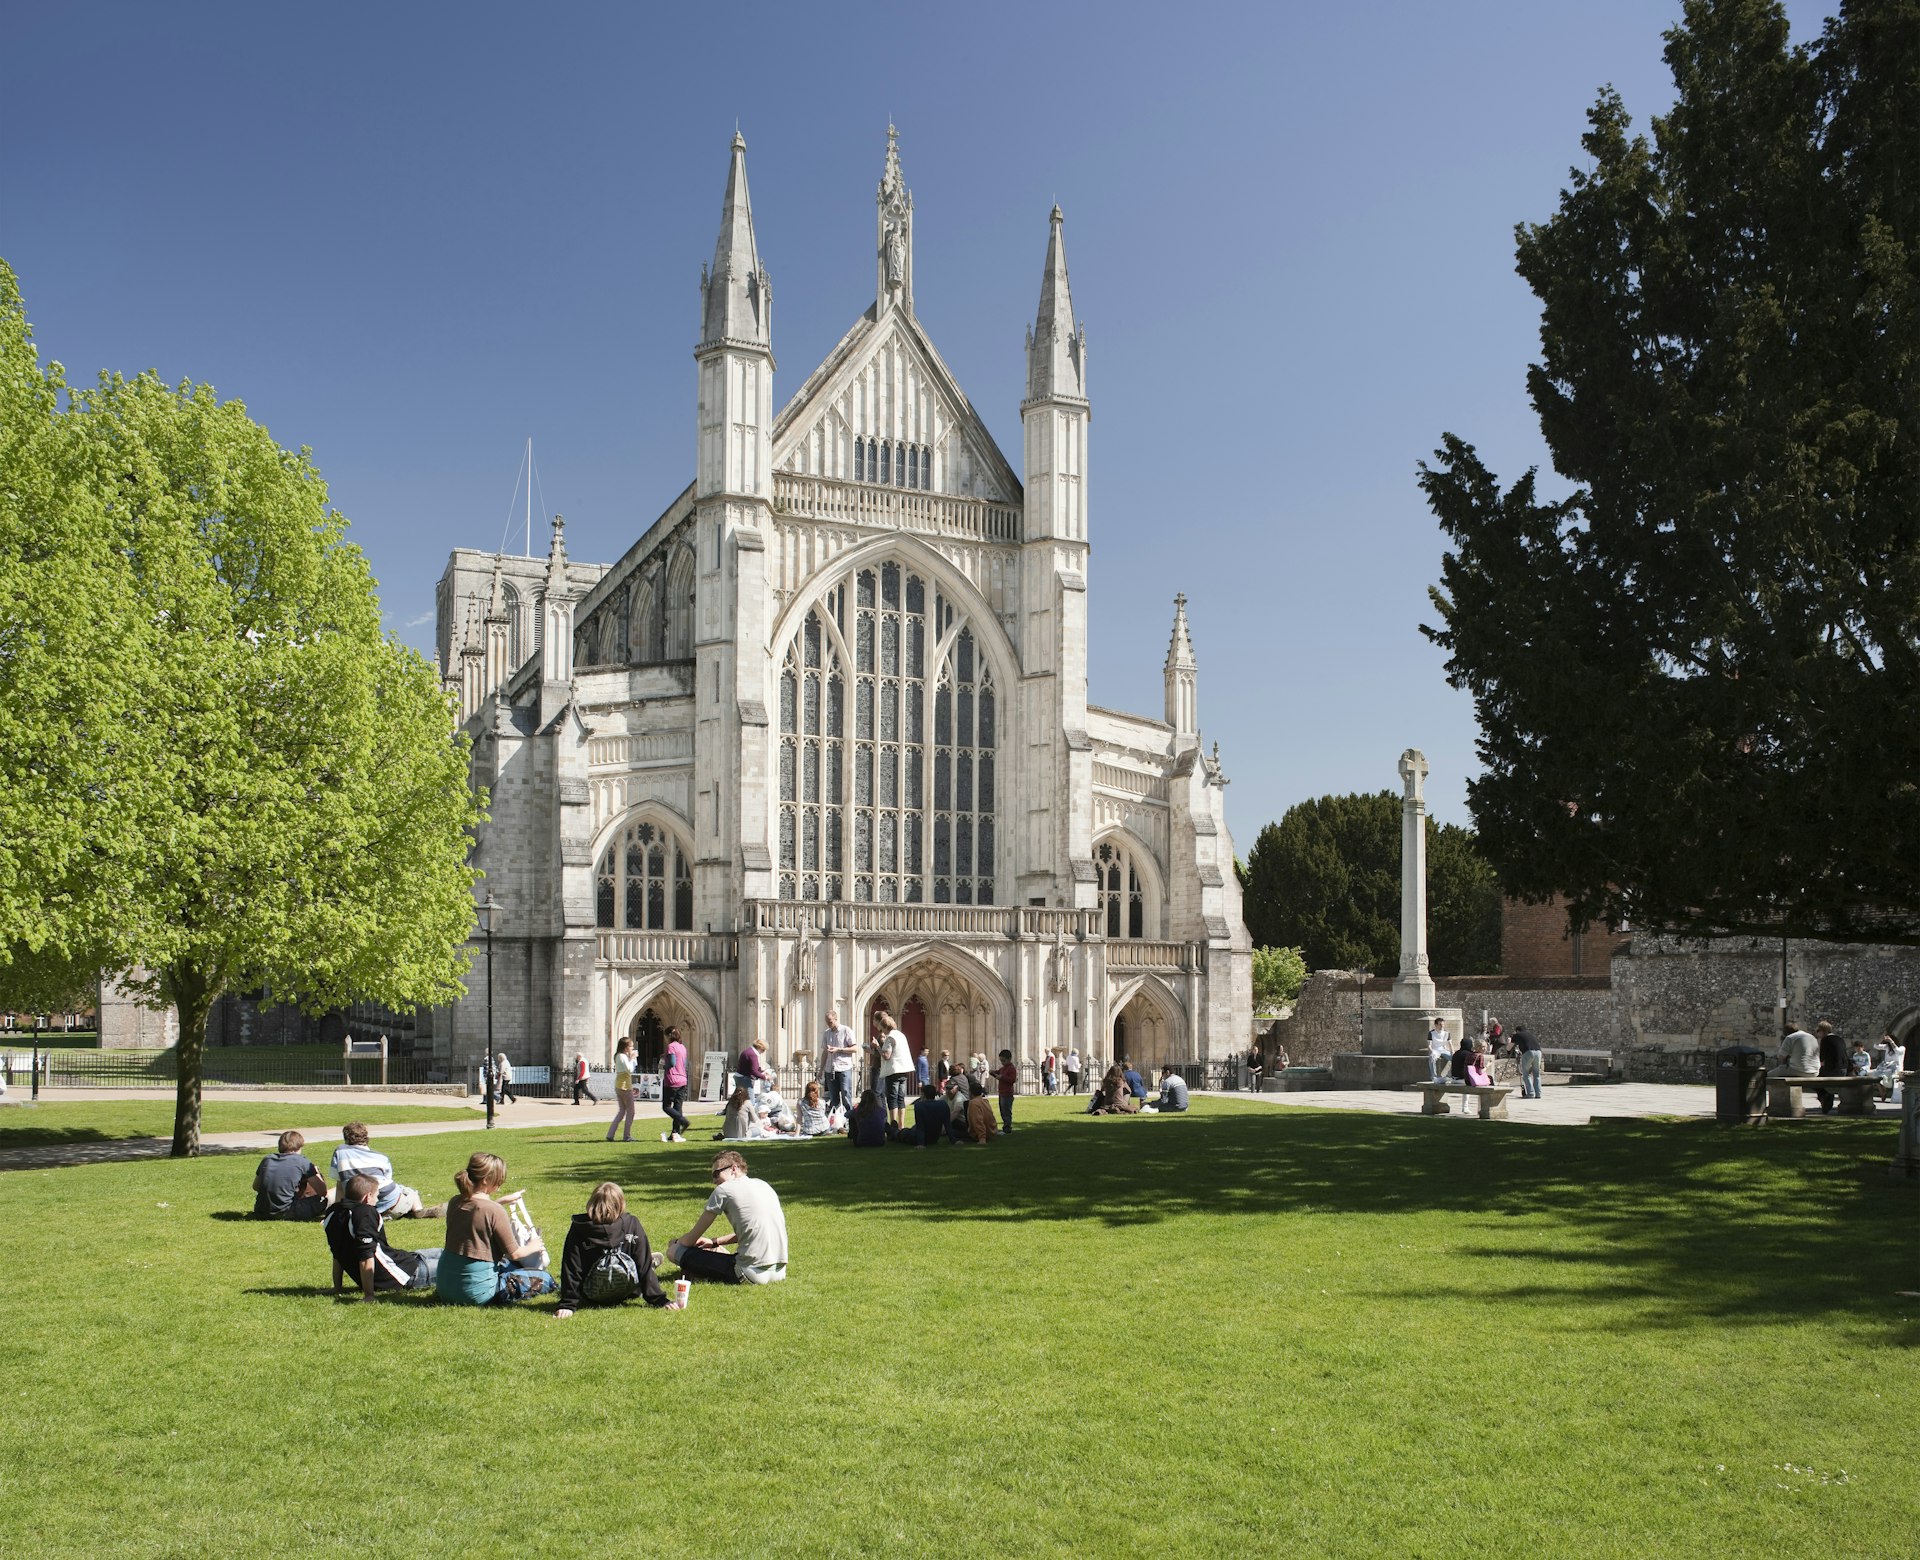 People sit on the grass on a sunny day in front of Winchester Cathedral in Winchester, England